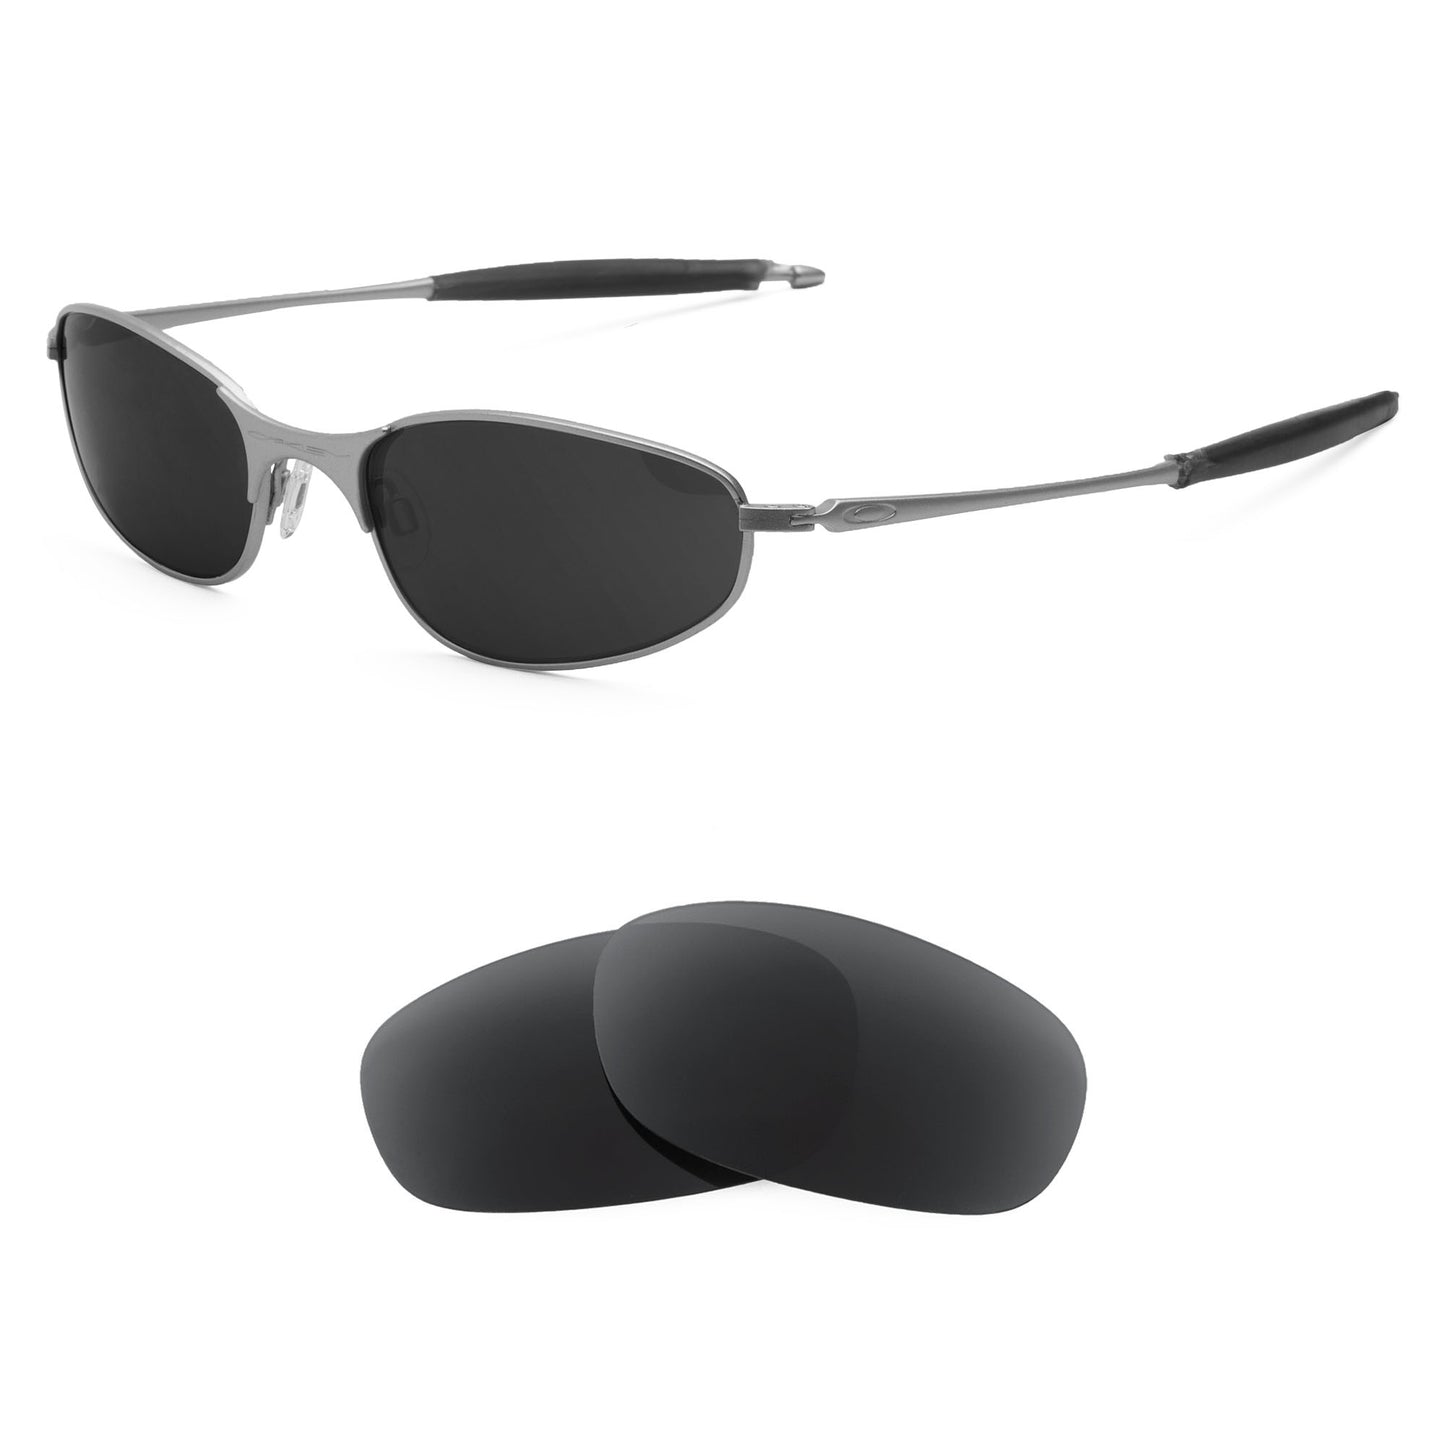 Oakley A Wire 2.0 sunglasses with replacement lenses